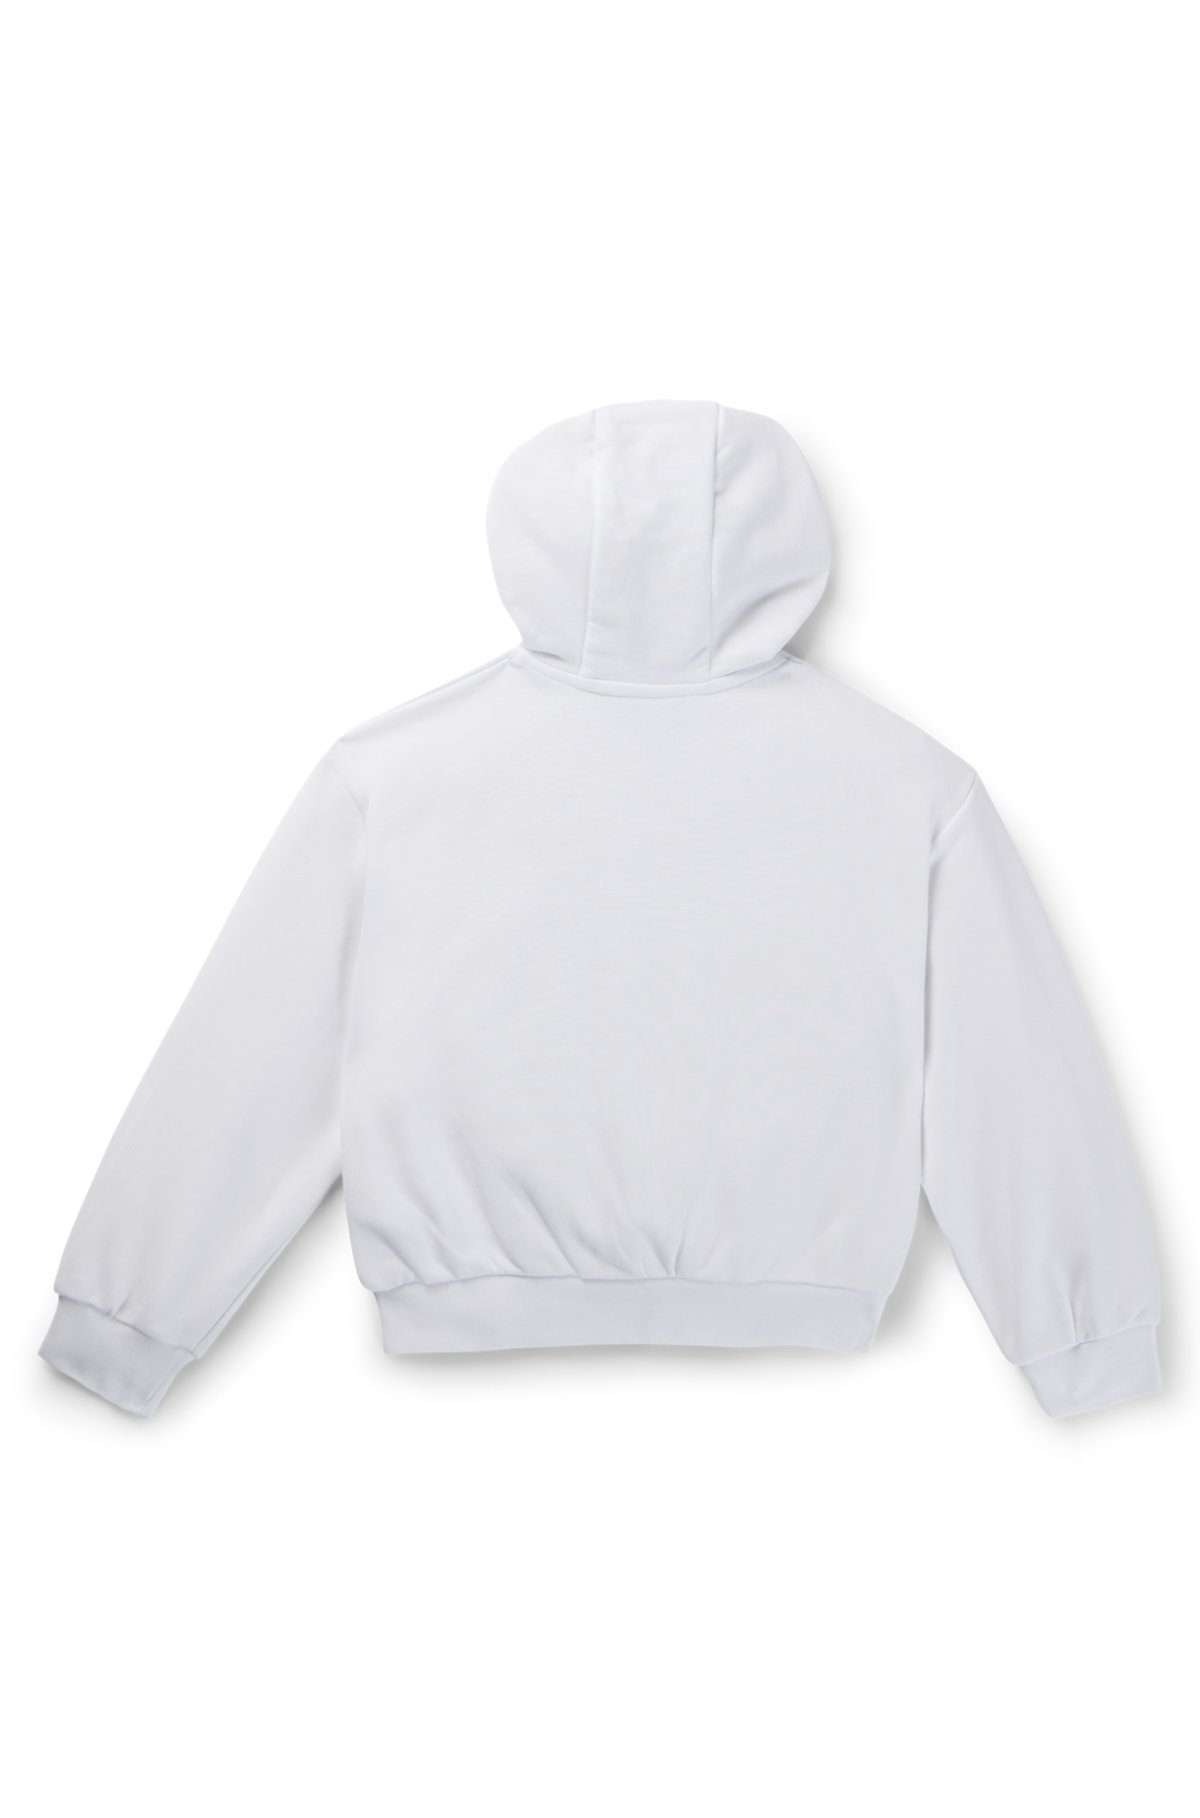 Kids' fleece hoodie with signature details, White